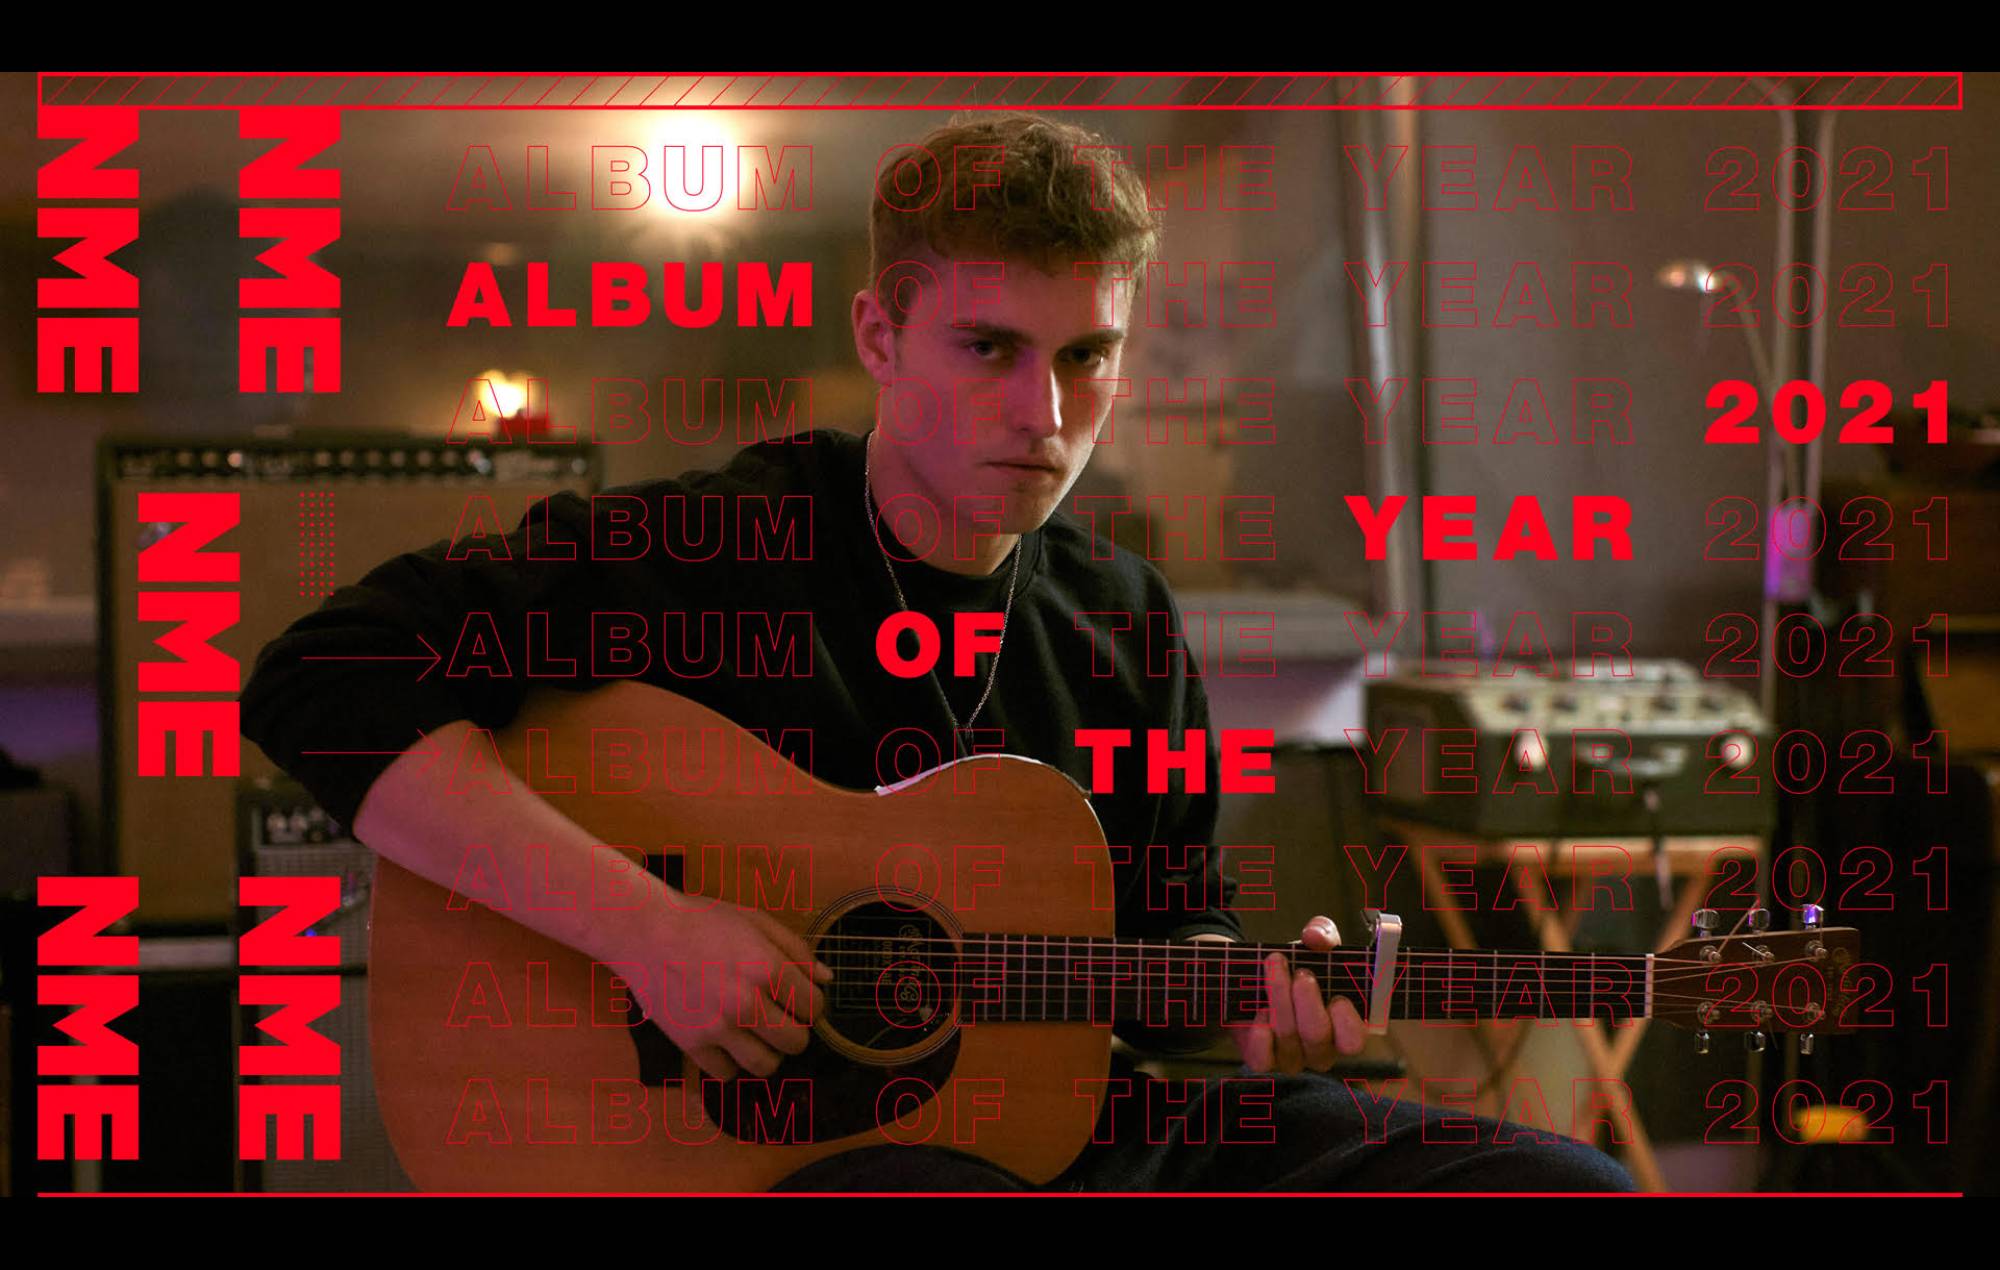 Sam Fender on winning NME’s Album of the Year for ‘Seventeen Going Under’: “It means the world to me”